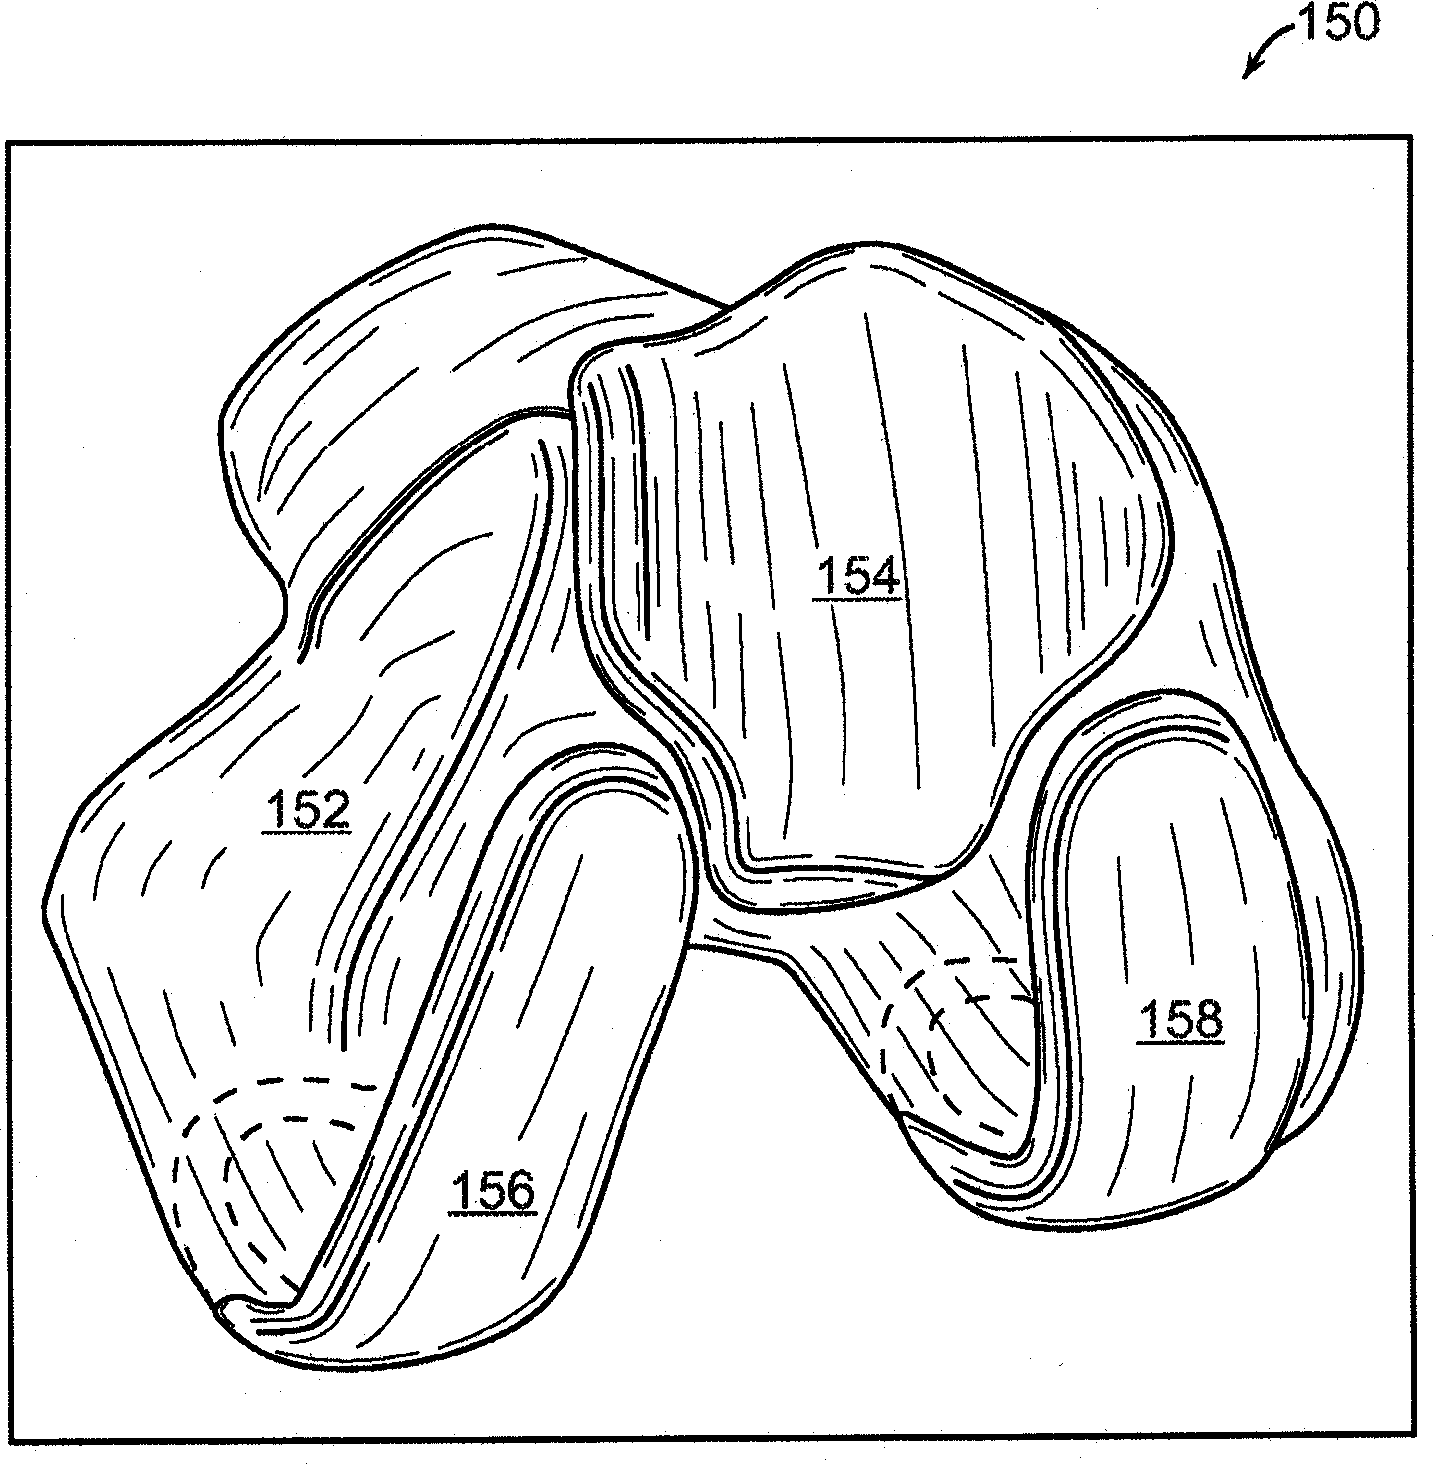 Implant Planning Using Areas Representing Cartilage